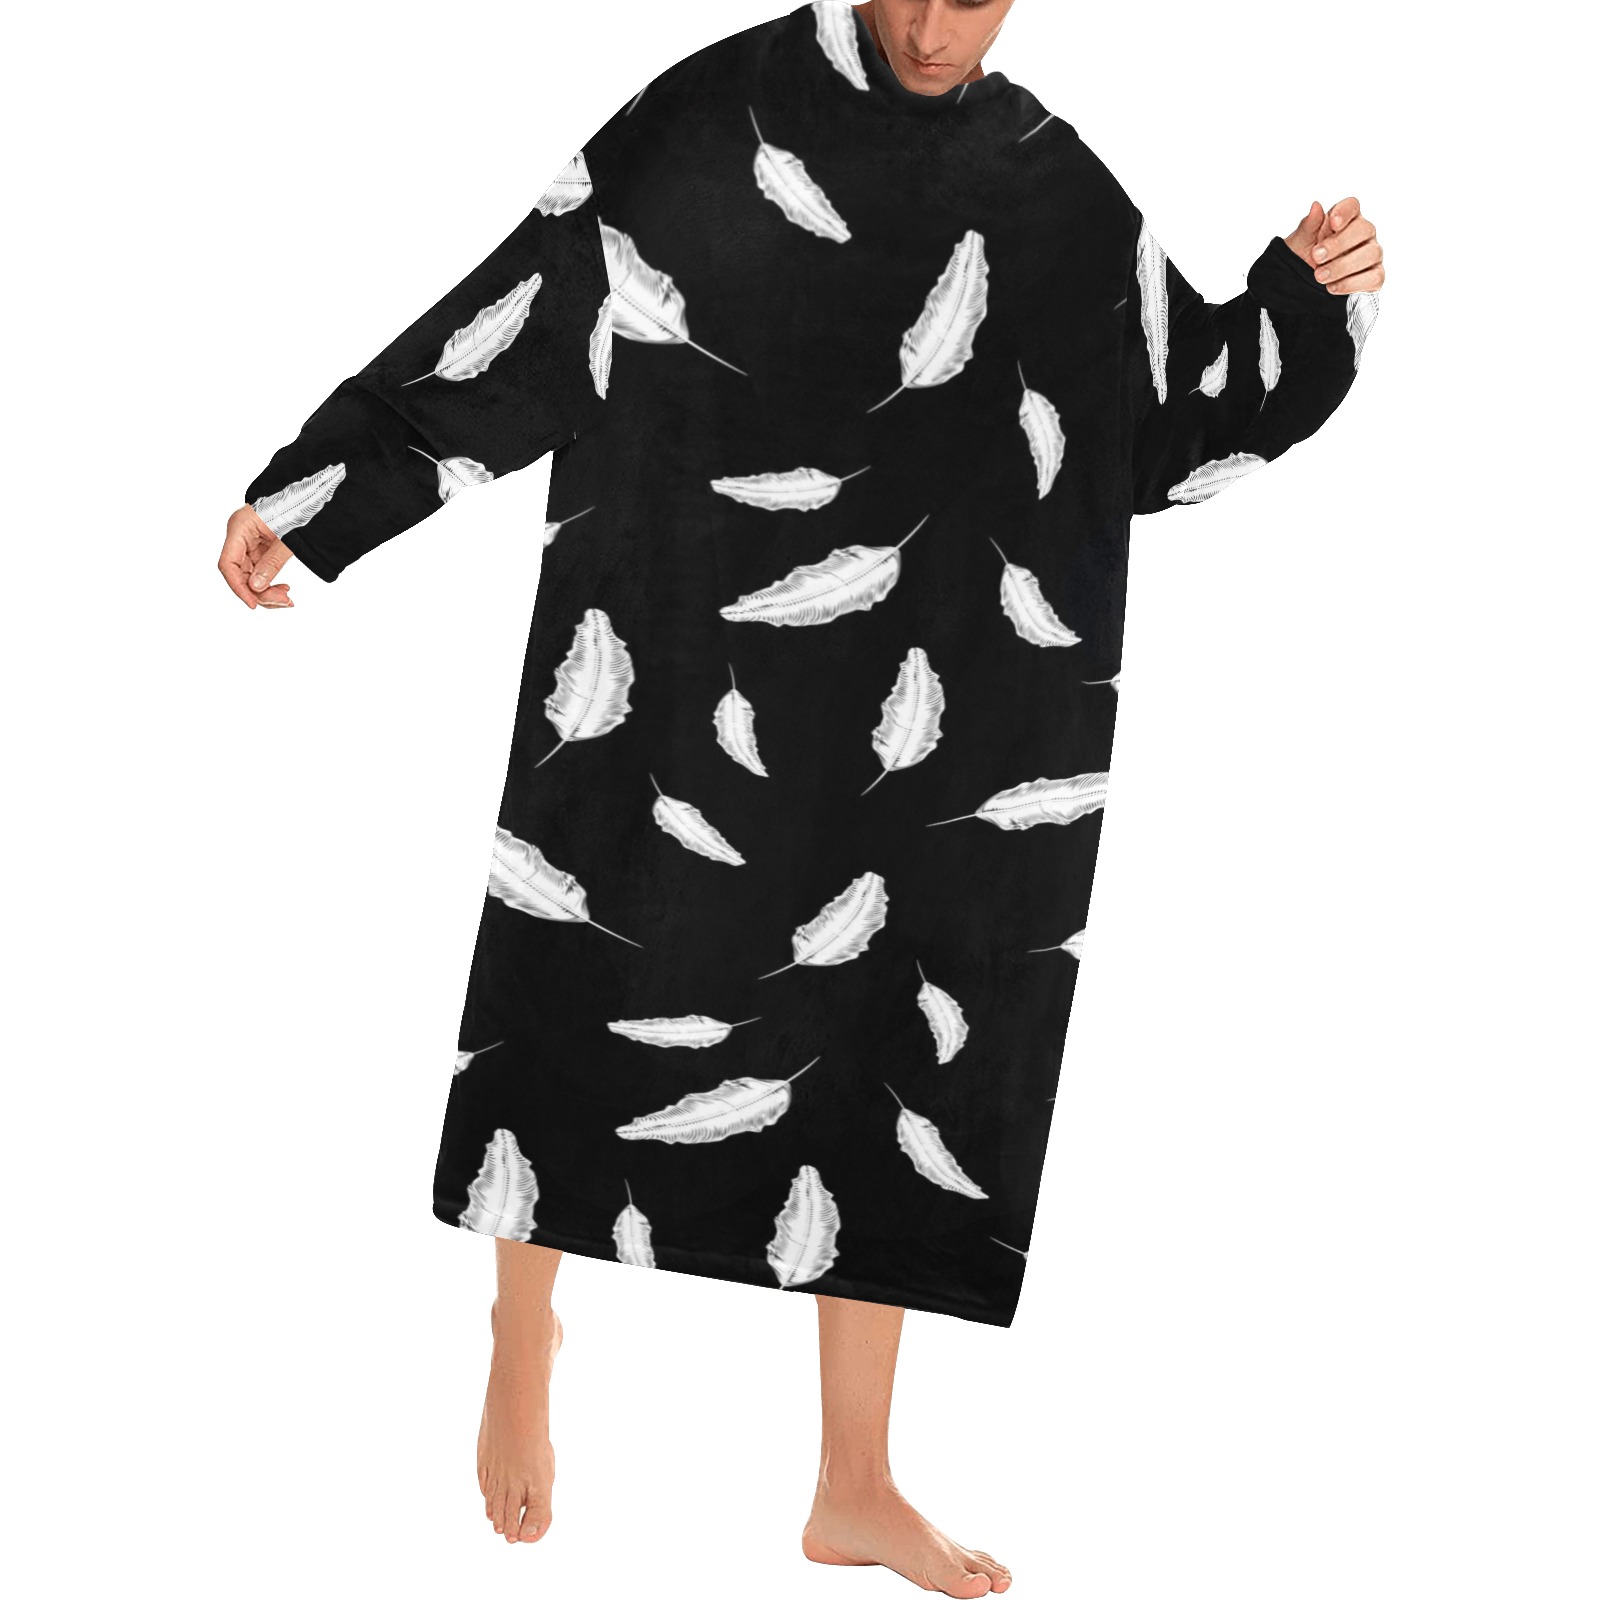 White Feathers Blanket Robe with Sleeves for Adults